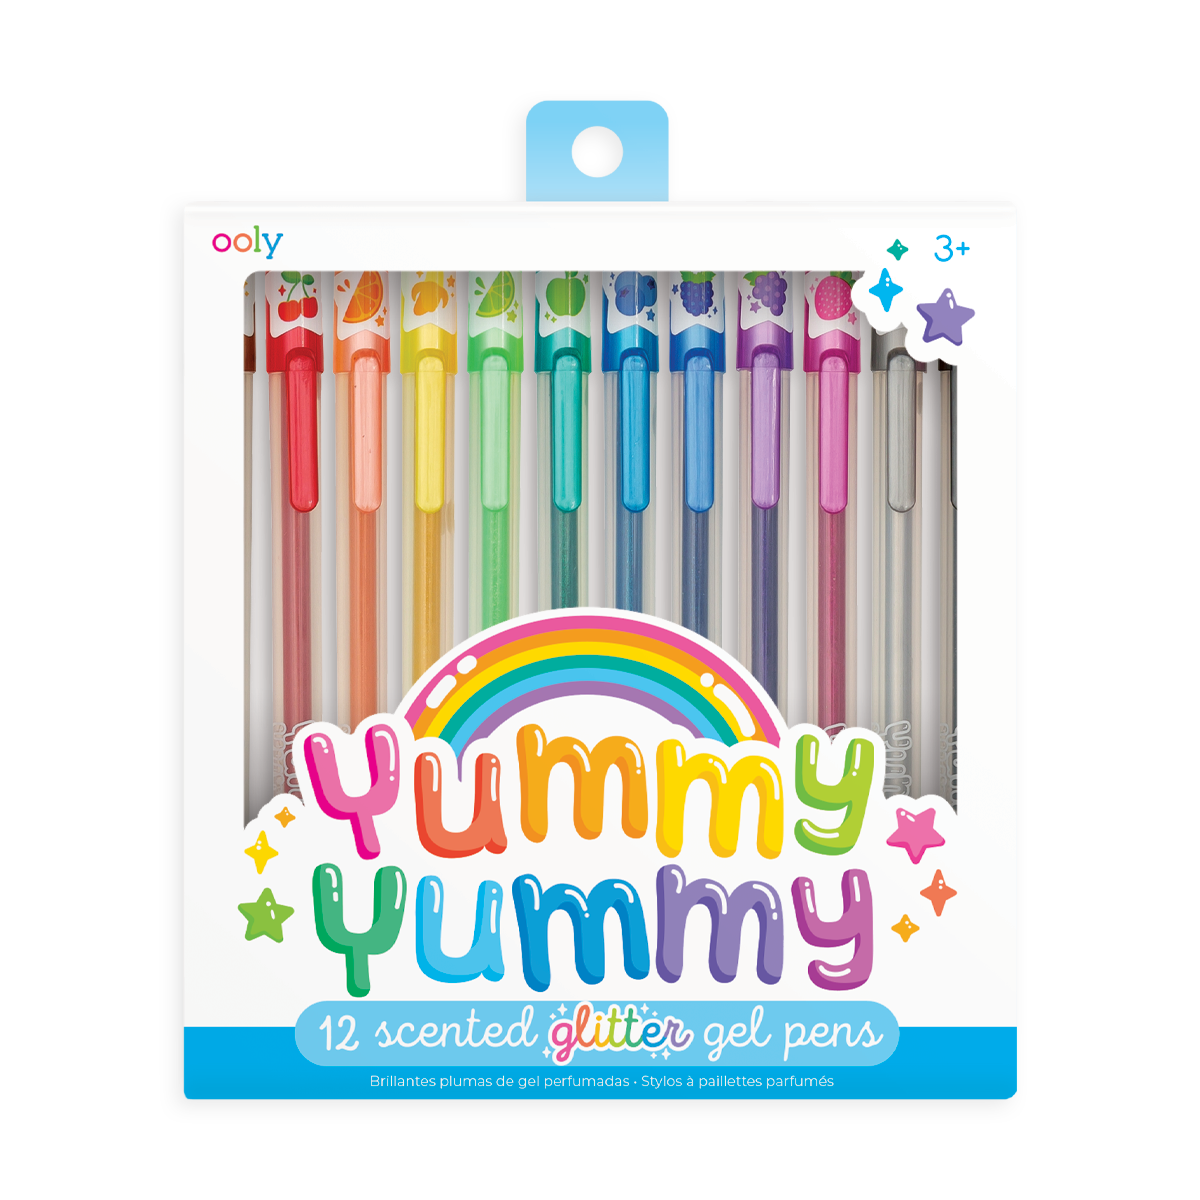  Ooly Scented Yummy Yummy Glitter Gel Pens Set of 12 Pens (New  Gen) - Scented Glitter Pens for Kids, Adults, Art Supplies and Stationary  Supplies [Yummy Yummy Scented Glitter Pens 